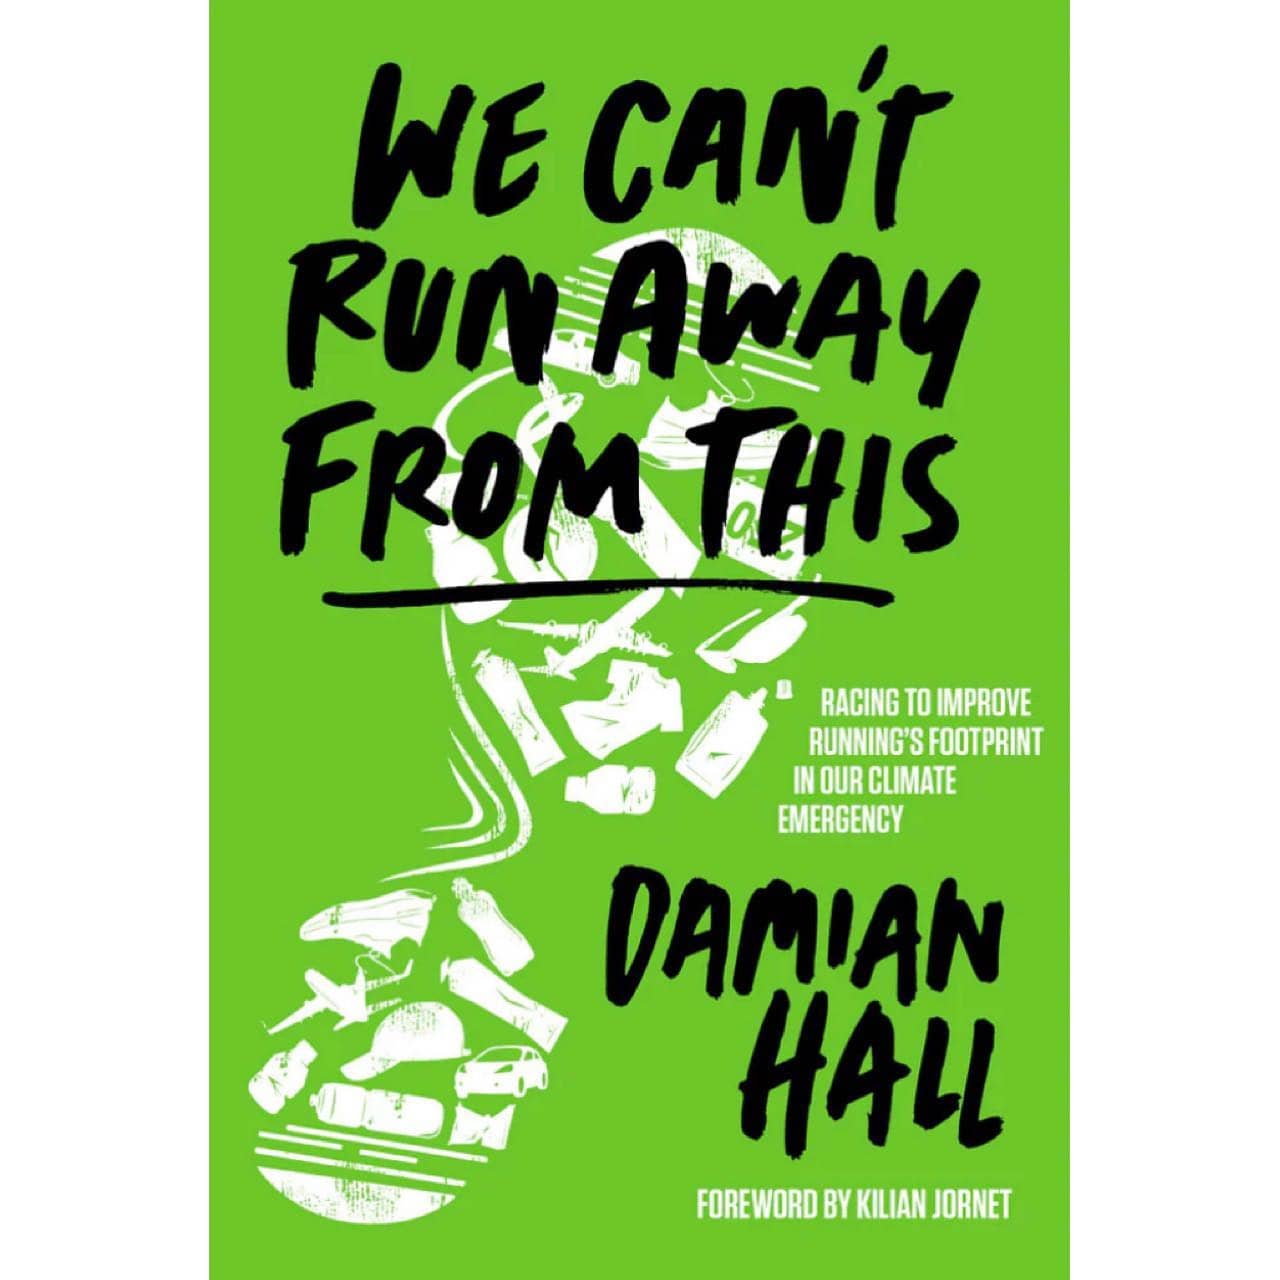 We're excited to be offering a signed copy of We Can't Run Away From This as a Peak District Chal...